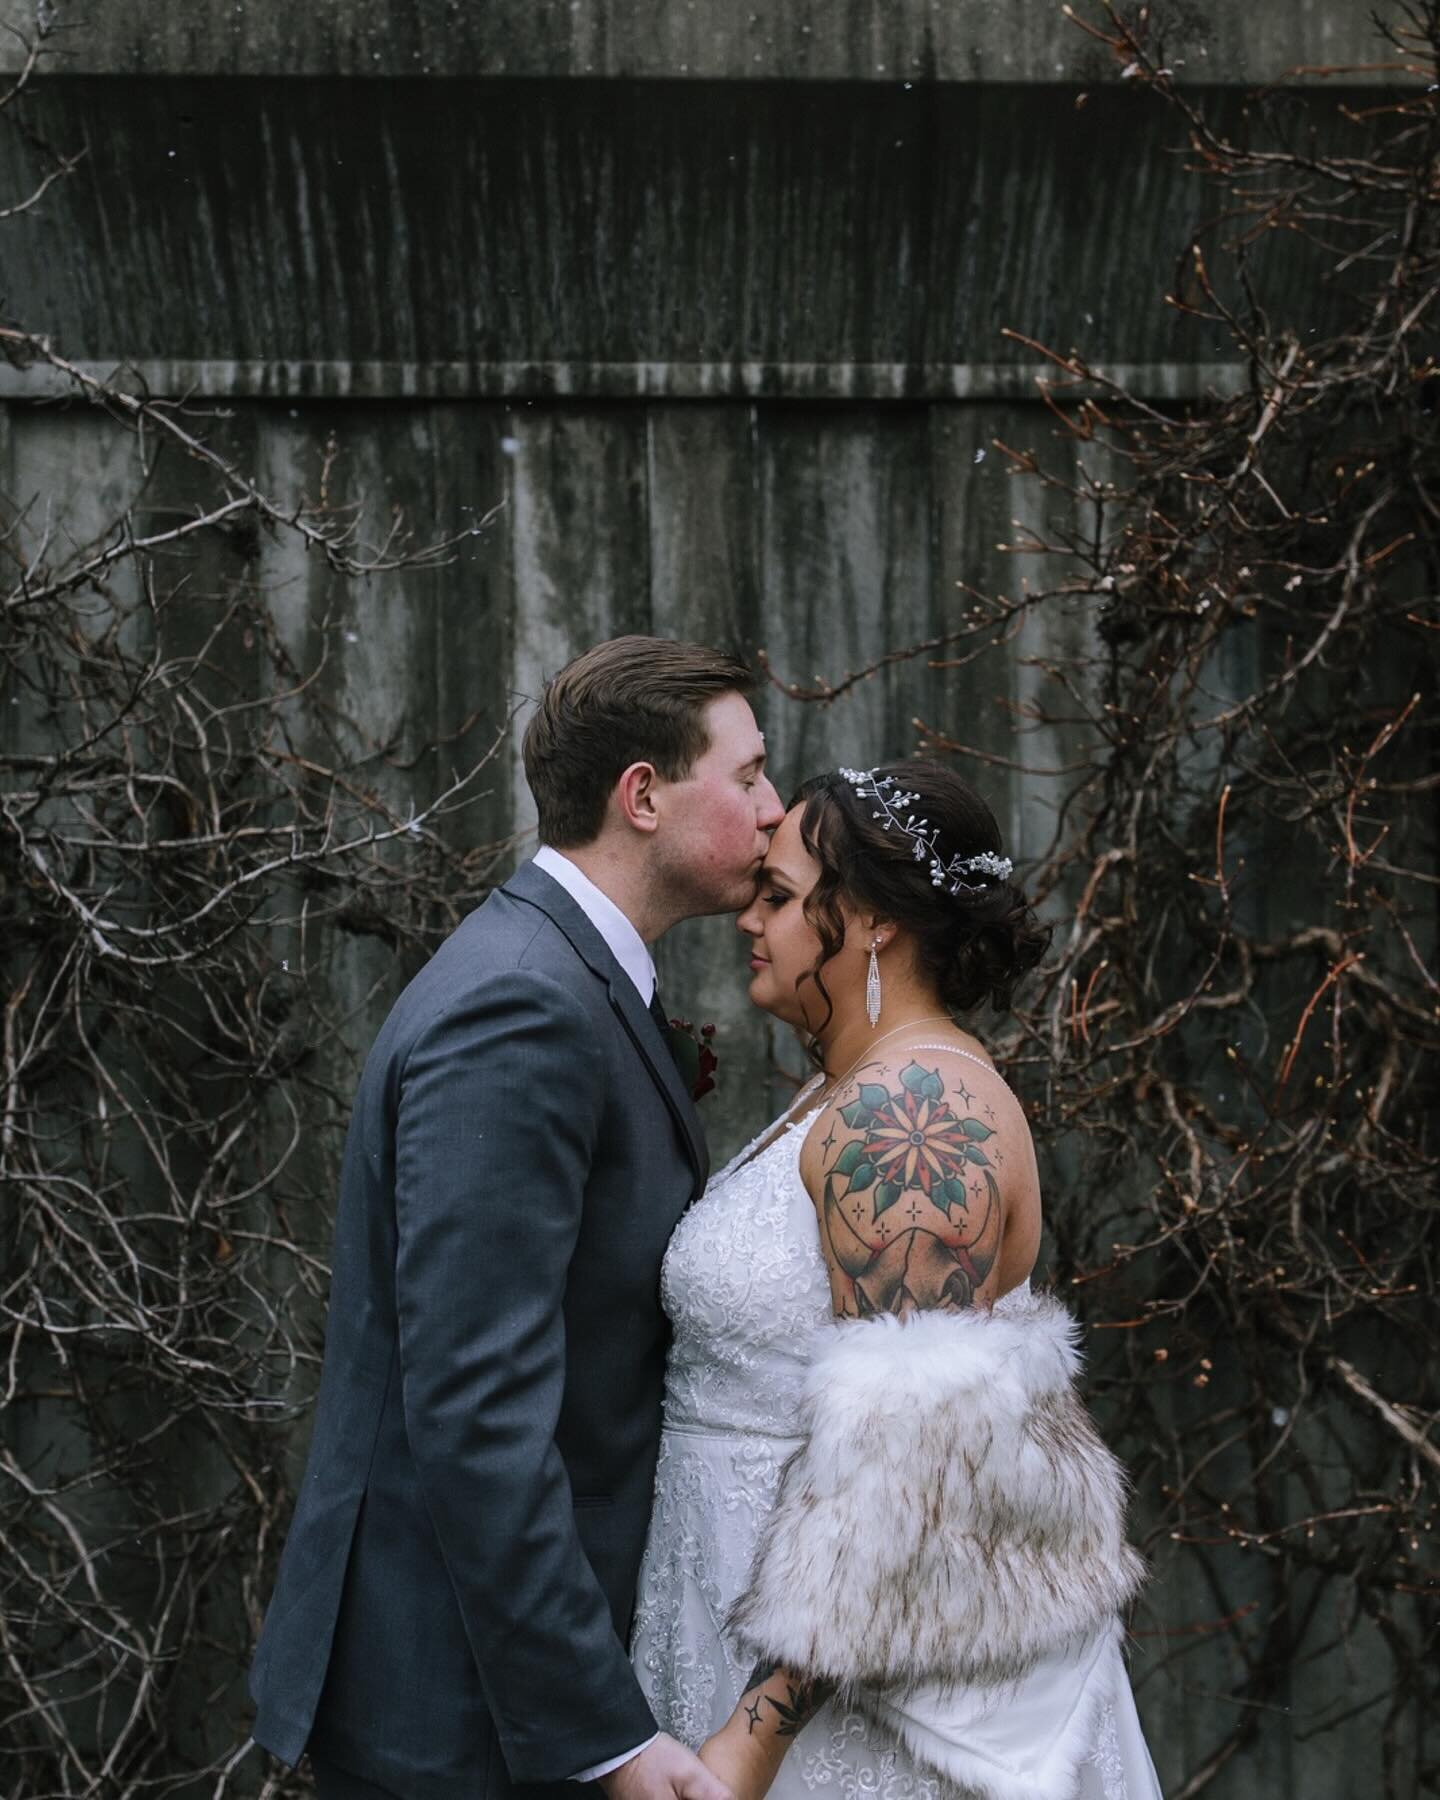 Winter weddings have a certain amount of magic to them. Celebrating one year of Alexis &amp; Jake. 💕 
⠀⠀⠀⠀⠀⠀⠀⠀⠀
⠀⠀⠀⠀⠀⠀⠀⠀⠀
⠀⠀⠀⠀⠀⠀⠀⠀⠀
⠀⠀⠀⠀⠀⠀⠀⠀⠀
⠀⠀⠀⠀⠀⠀⠀⠀⠀
⠀⠀⠀⠀⠀⠀⠀⠀⠀
⠀⠀⠀⠀⠀⠀⠀⠀⠀
⠀⠀⠀⠀⠀⠀⠀⠀⠀
⠀⠀⠀⠀⠀⠀⠀⠀⠀
⠀⠀⠀⠀⠀⠀⠀⠀⠀
 #kaitlinpowellphotography #burghbrides #winter